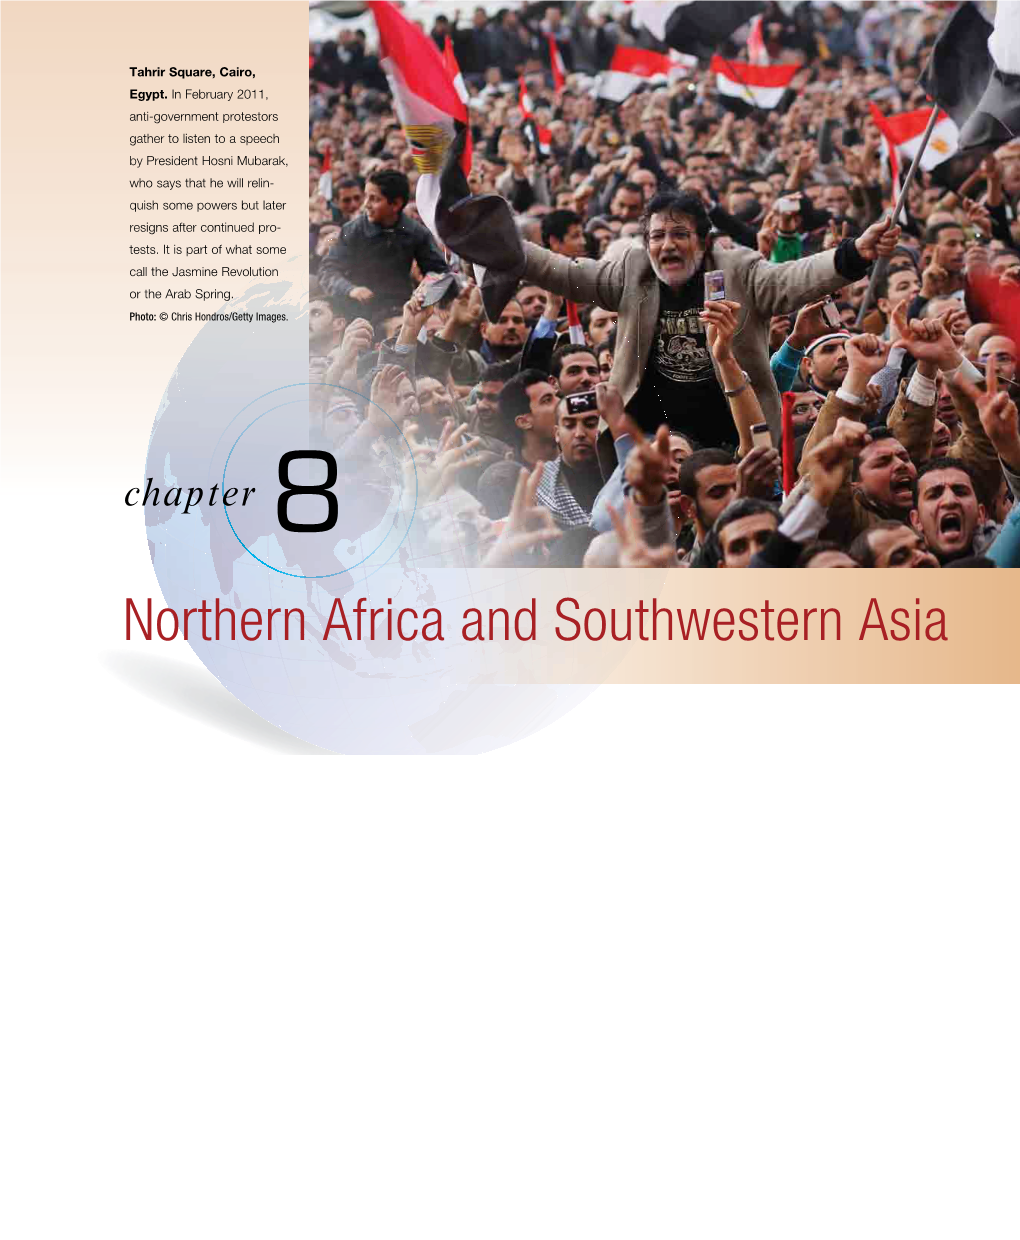 Northern Africa and Southwestern Asia